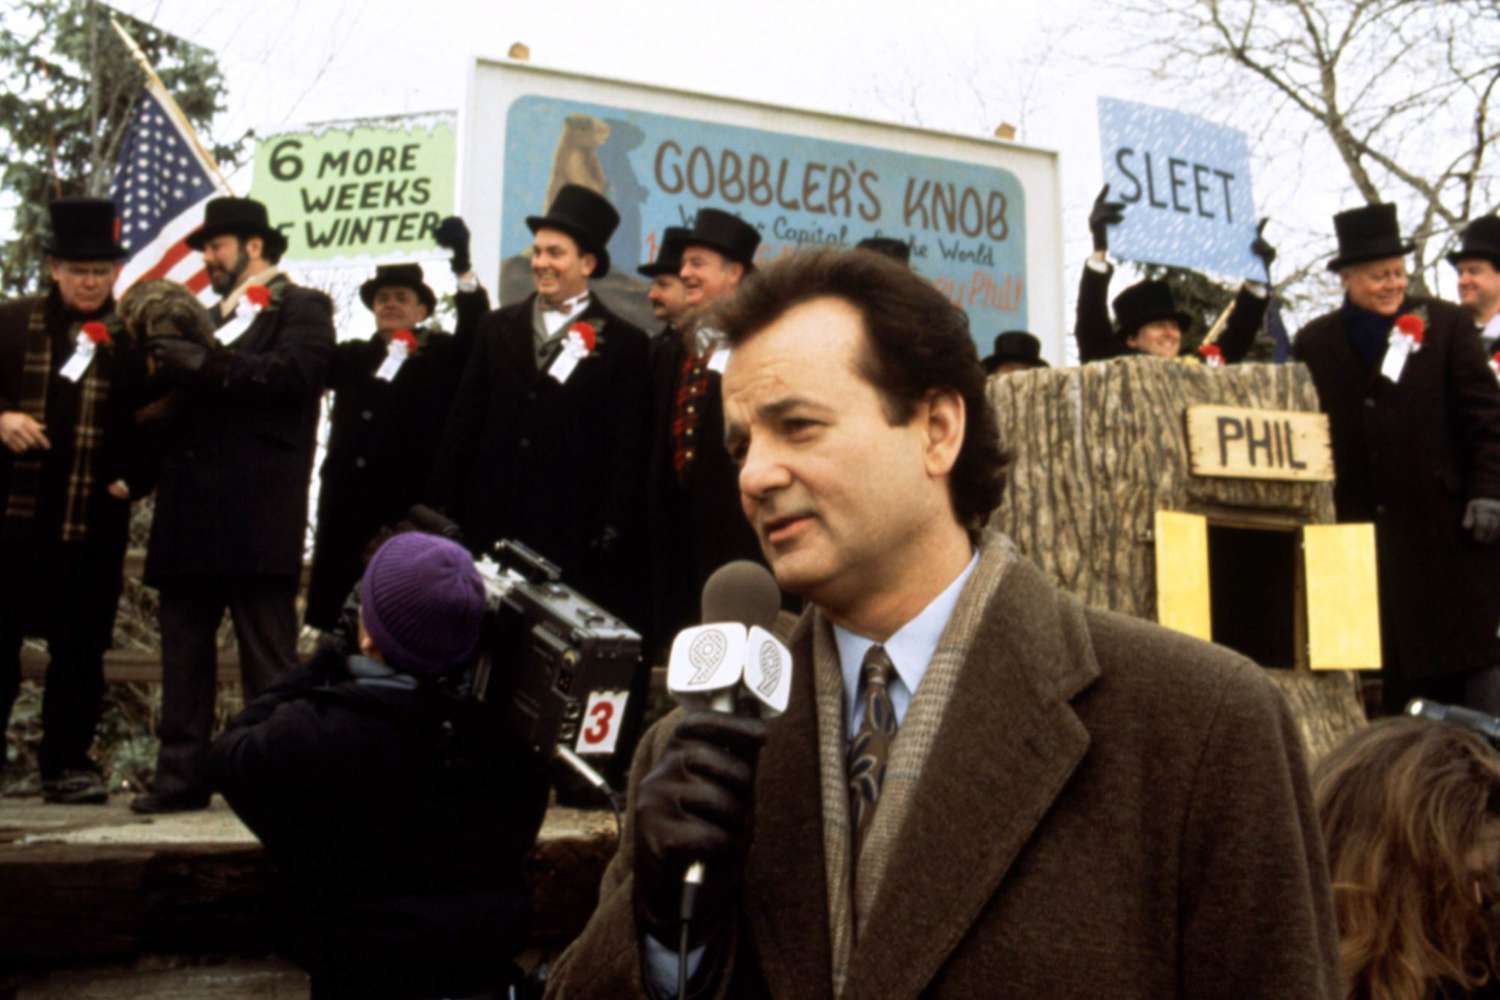 GROUNDHOG DAY, Bill Murray, 1993. (c) Columbia/courtesy Everett Collection